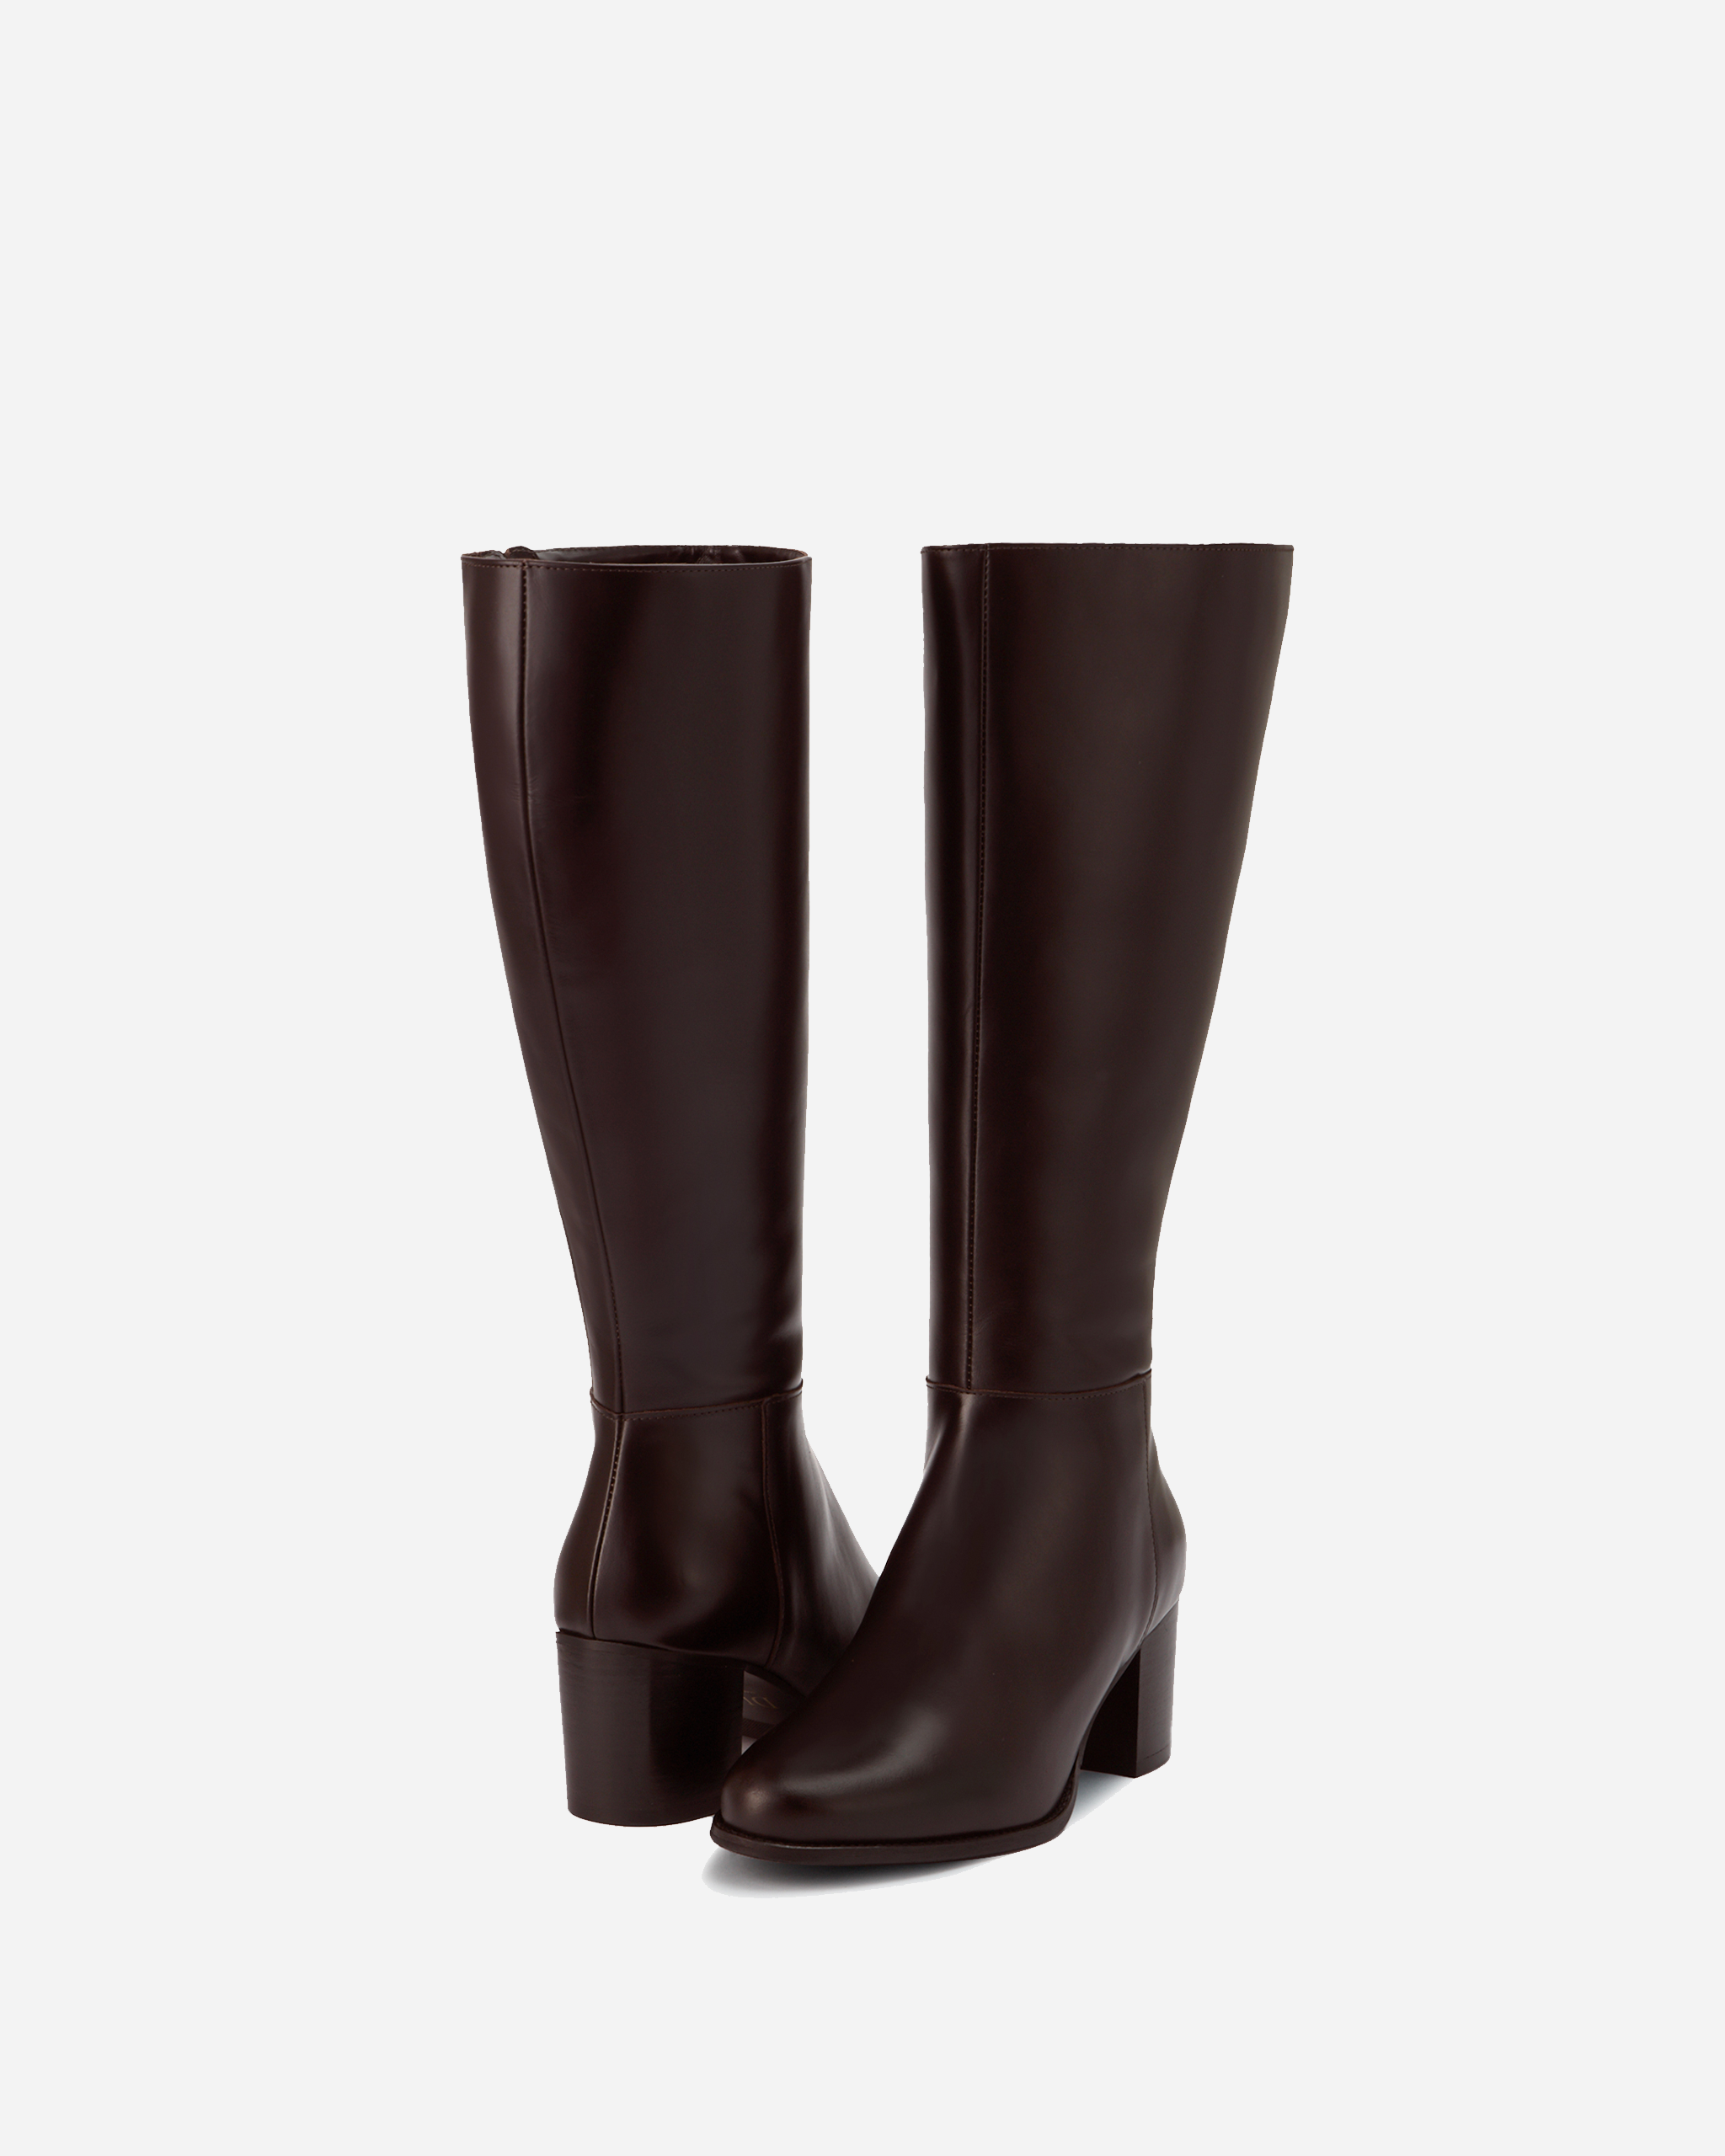 Ladies knee high brown leather boots